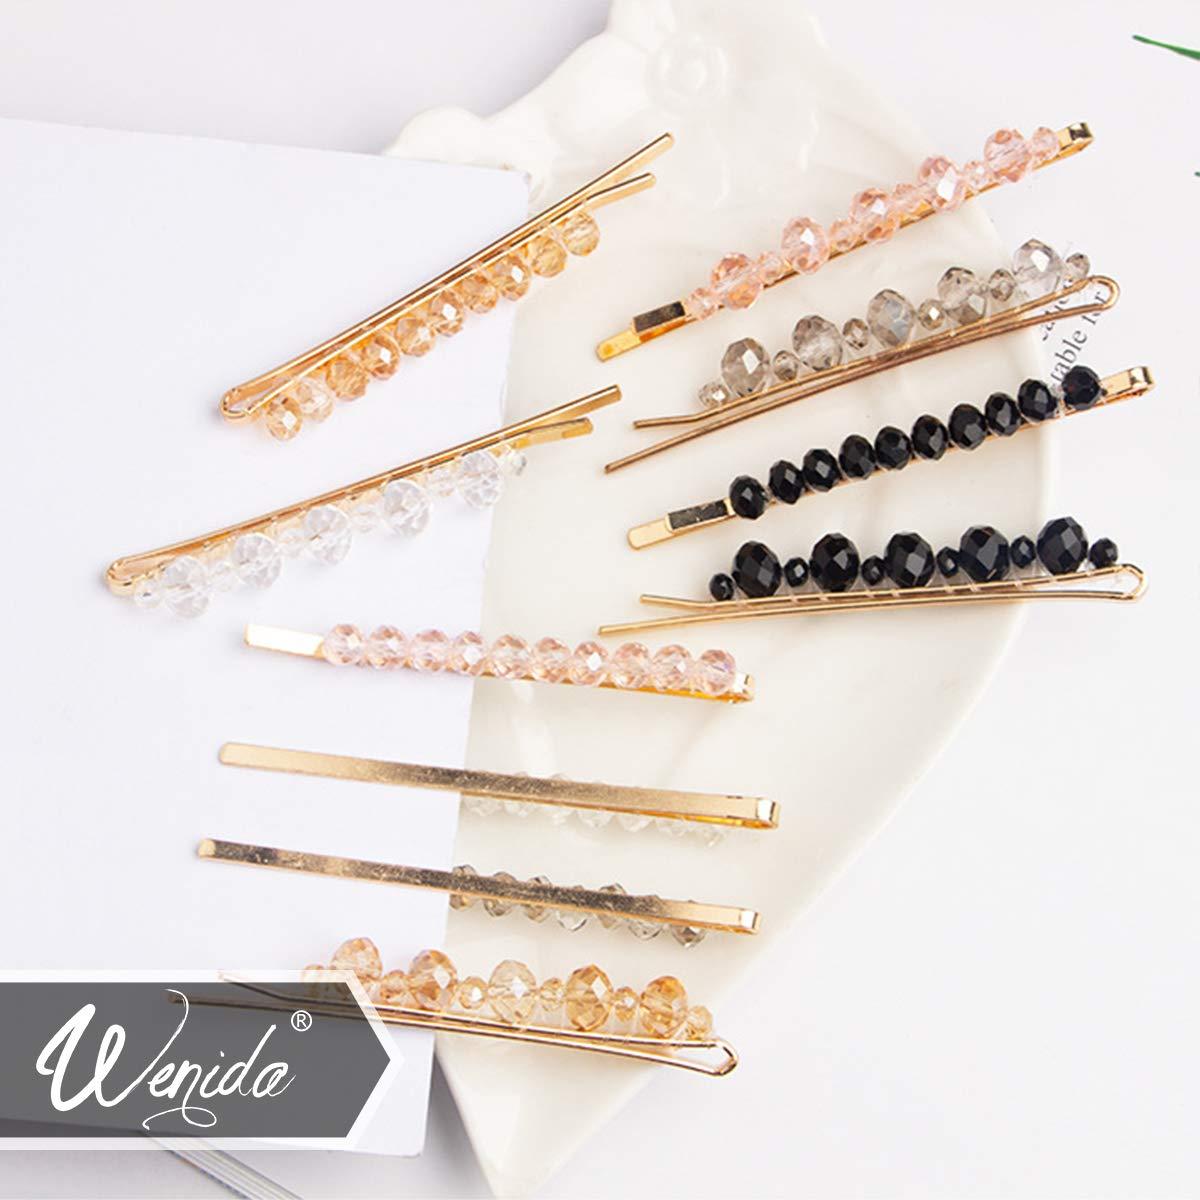 Hair Clips Wenida 10 Pieces Fashion Crystal Metal Hair Pins Barrettes Bobby  Pins Decorative Hair Styling for Women Girls